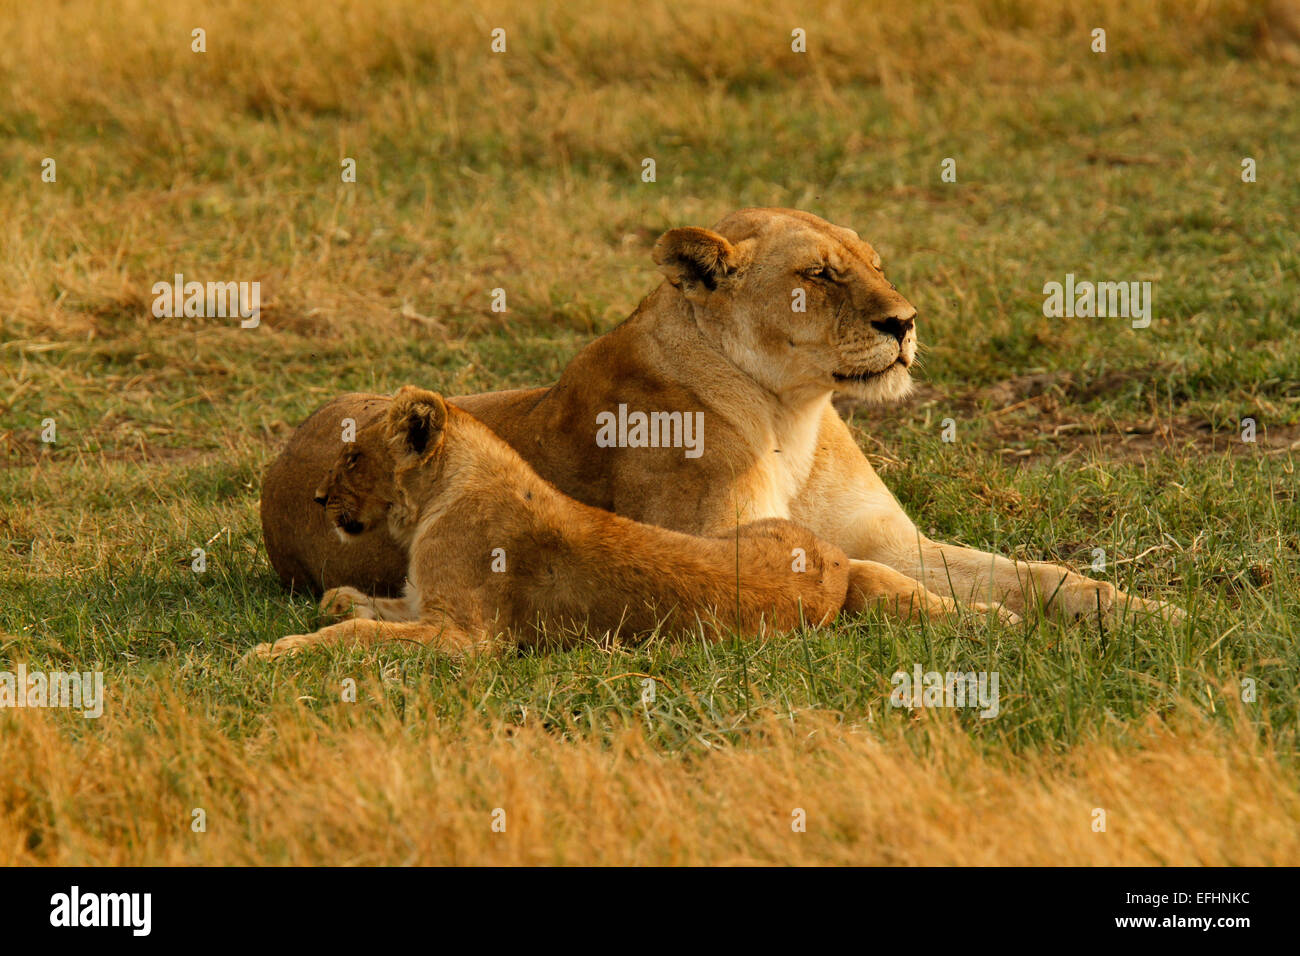 Lions are the laziest of the big cats resting for 16 to 20 hours a day. Rest of the time hunting courting, protecting territory Stock Photo